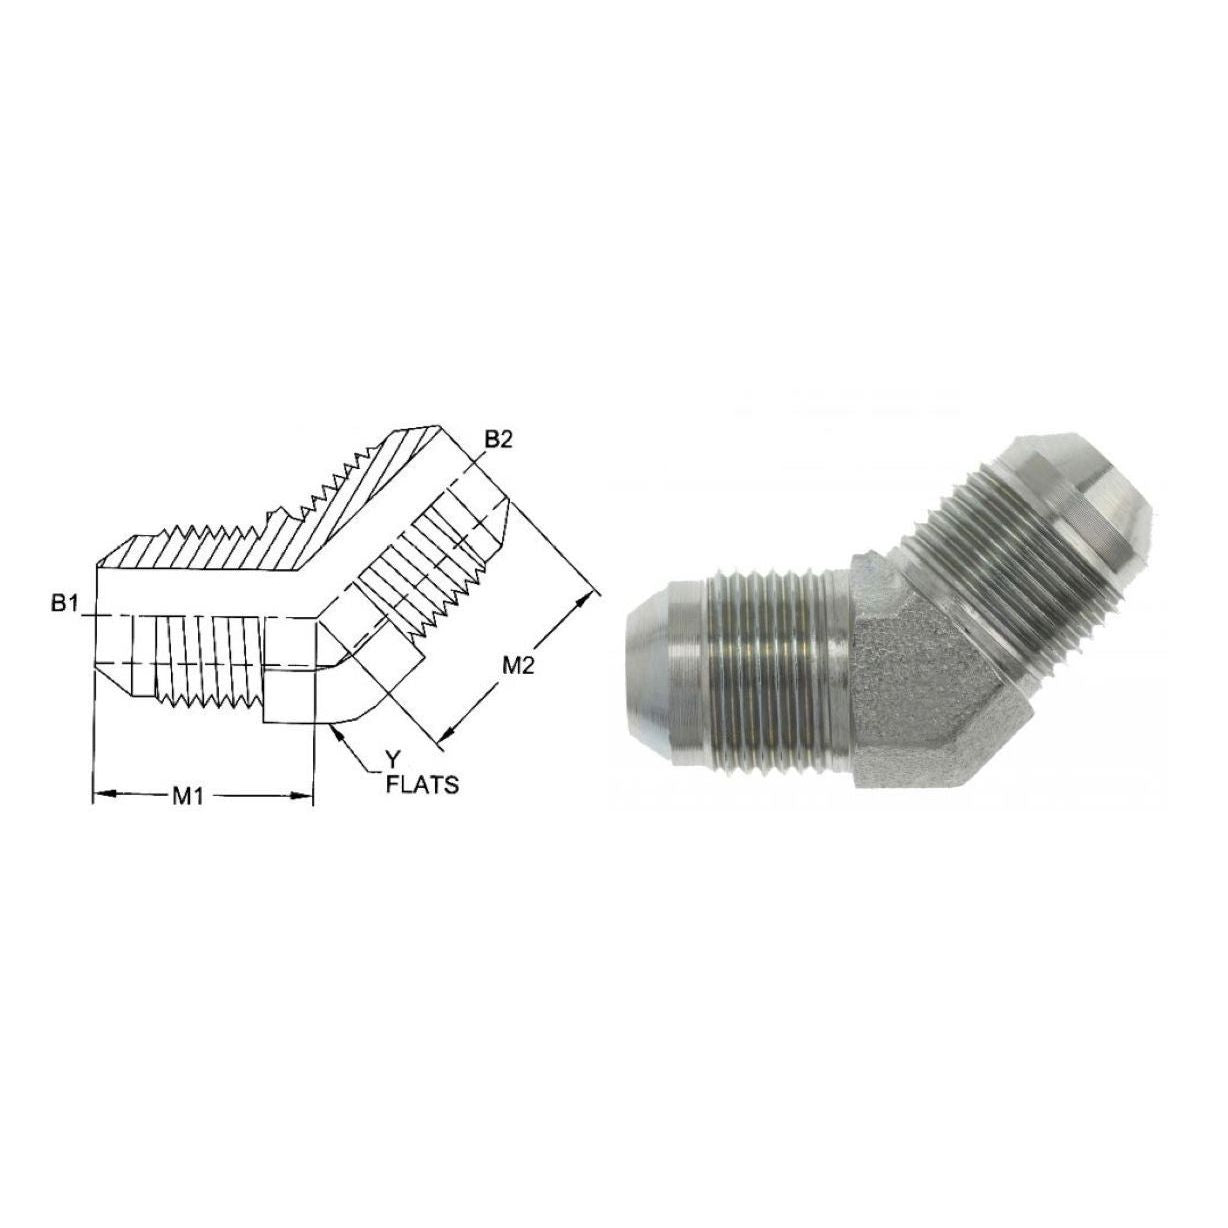 2504-04-04-SS : OneHydraulics 45-Degree Elbow, 0.25 (1/4) Male JIC x 0.25 (1/4) Male JIC, Stainless Steel, 9000psi